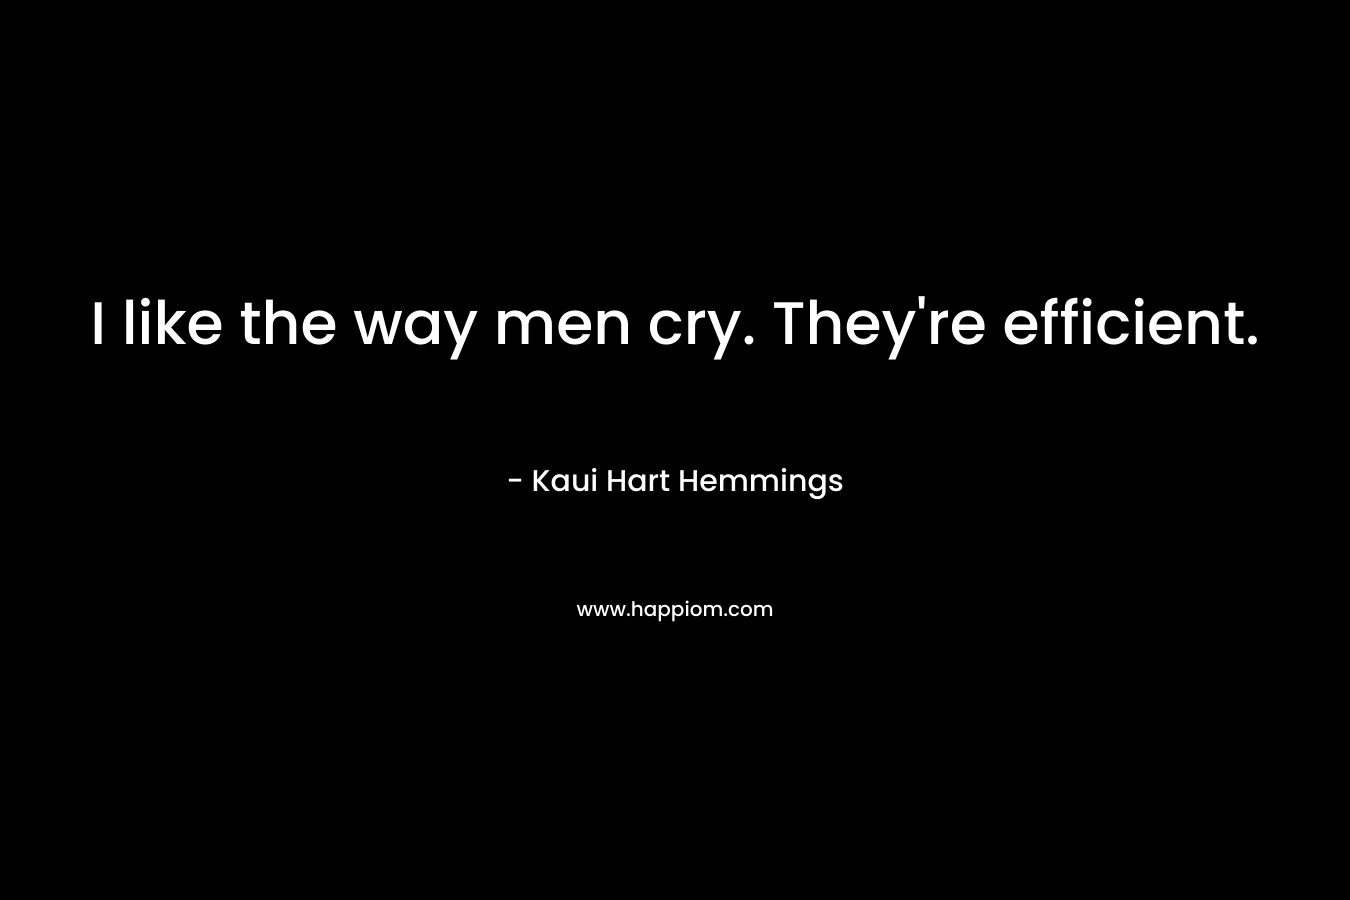 I like the way men cry. They're efficient.